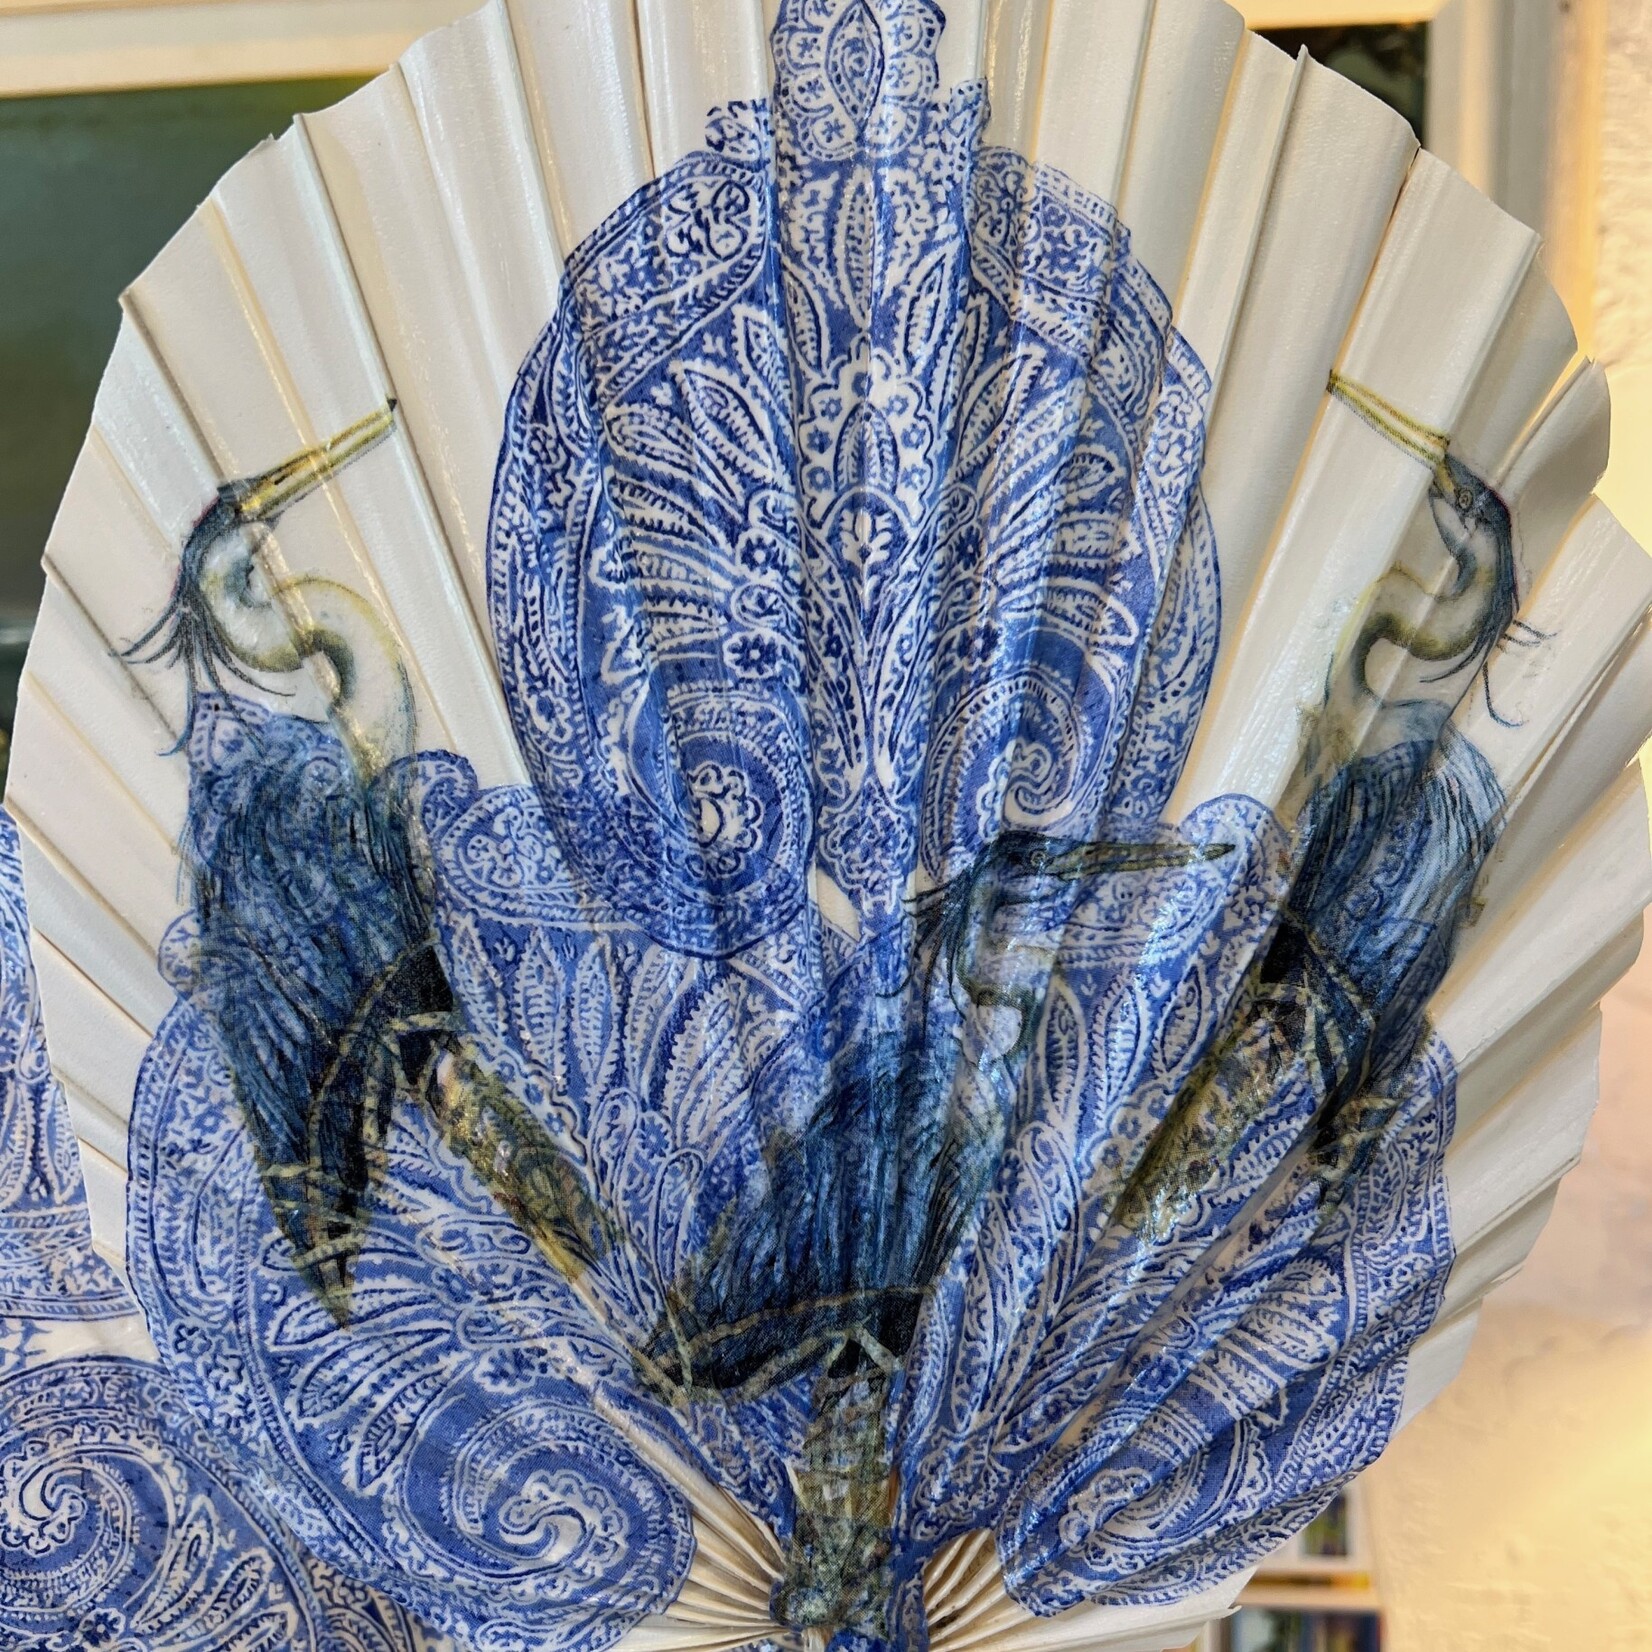 Pam Maschal Shell Vase w/collage palm fronds and starfish, 25", PAMM